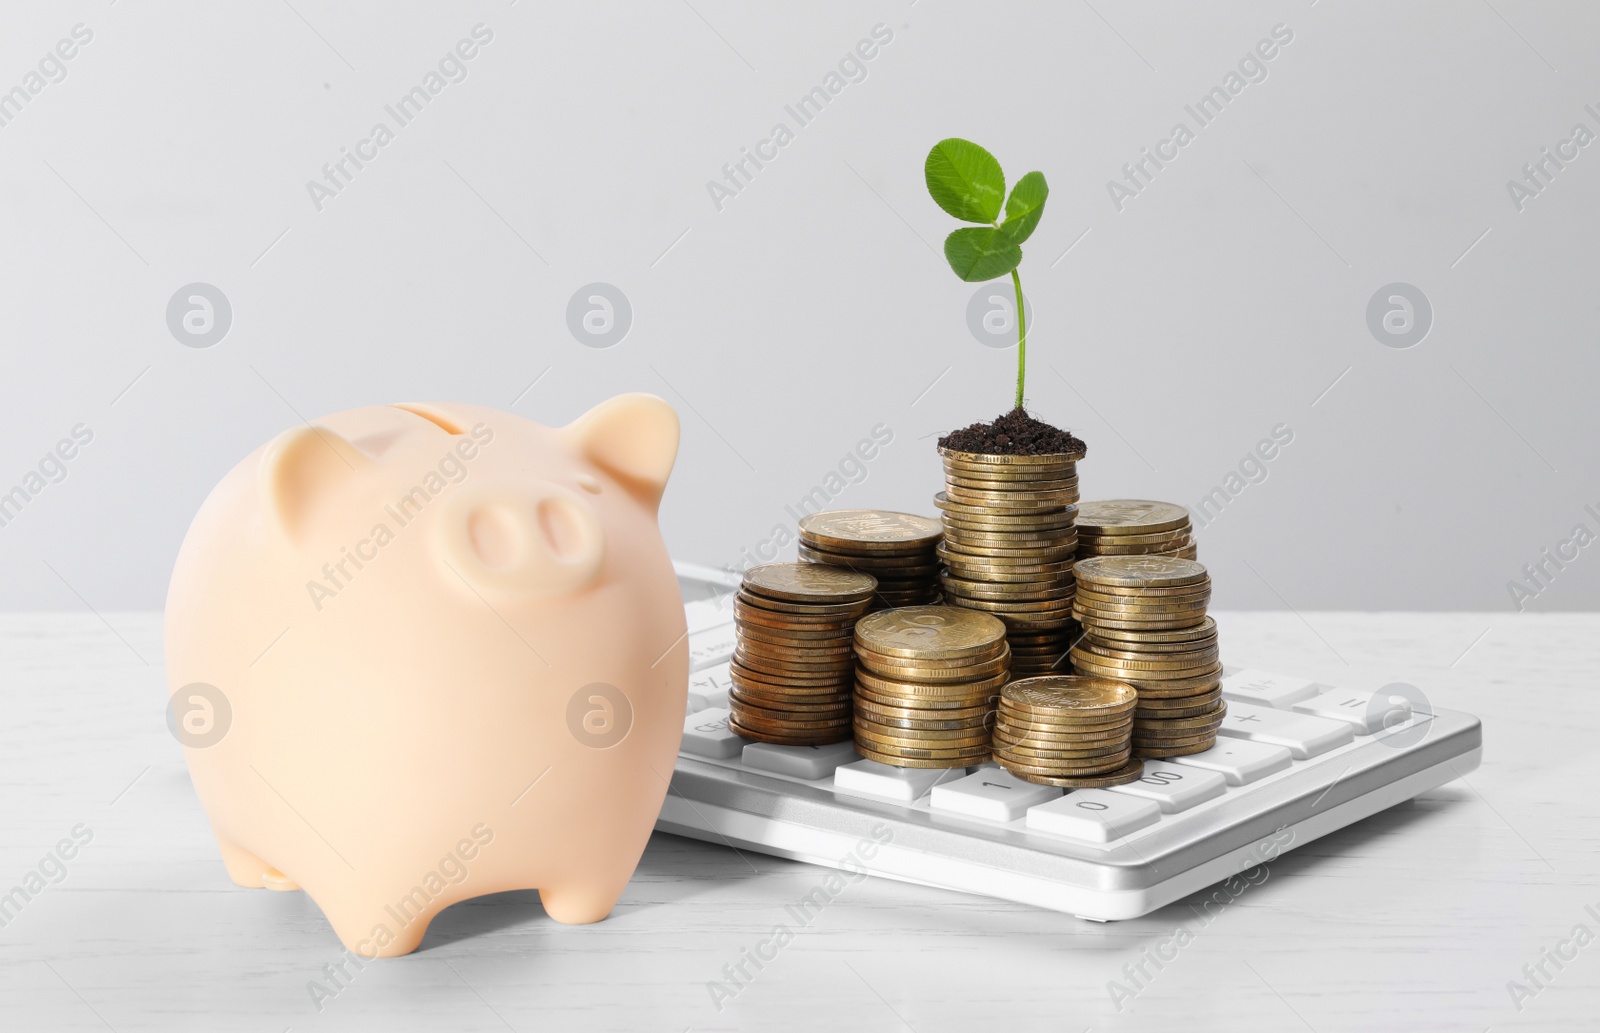 Photo of Stacks of coins with green sprout and piggy bank on white table against light grey background. Investment concept